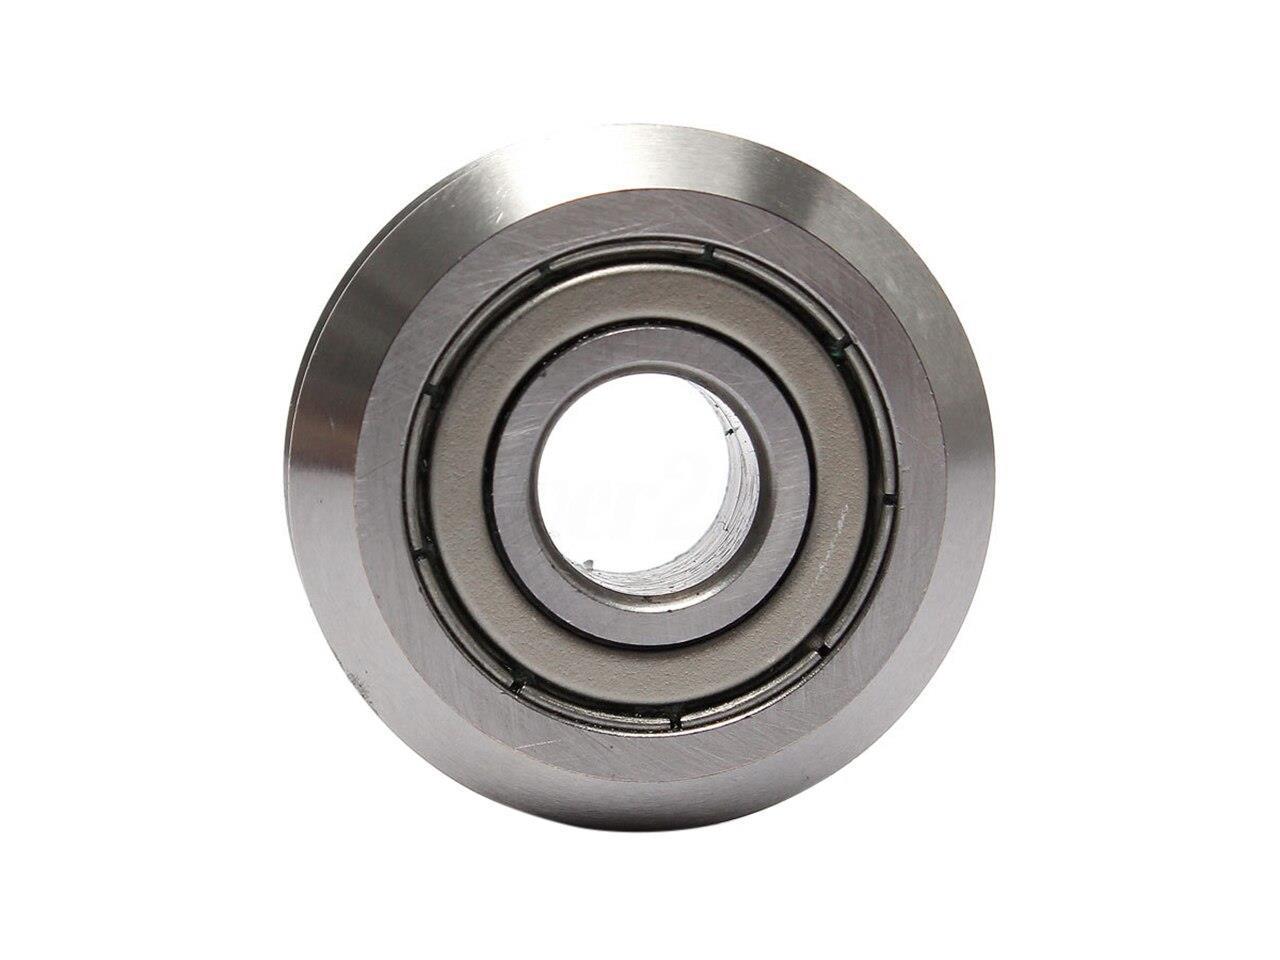 W1 Deep V Groove W-rail Guide Line Track Pulley Rollers Ball Bearings Steel  R7L8 Motors Vehicle Parts  Accessories HE8623942